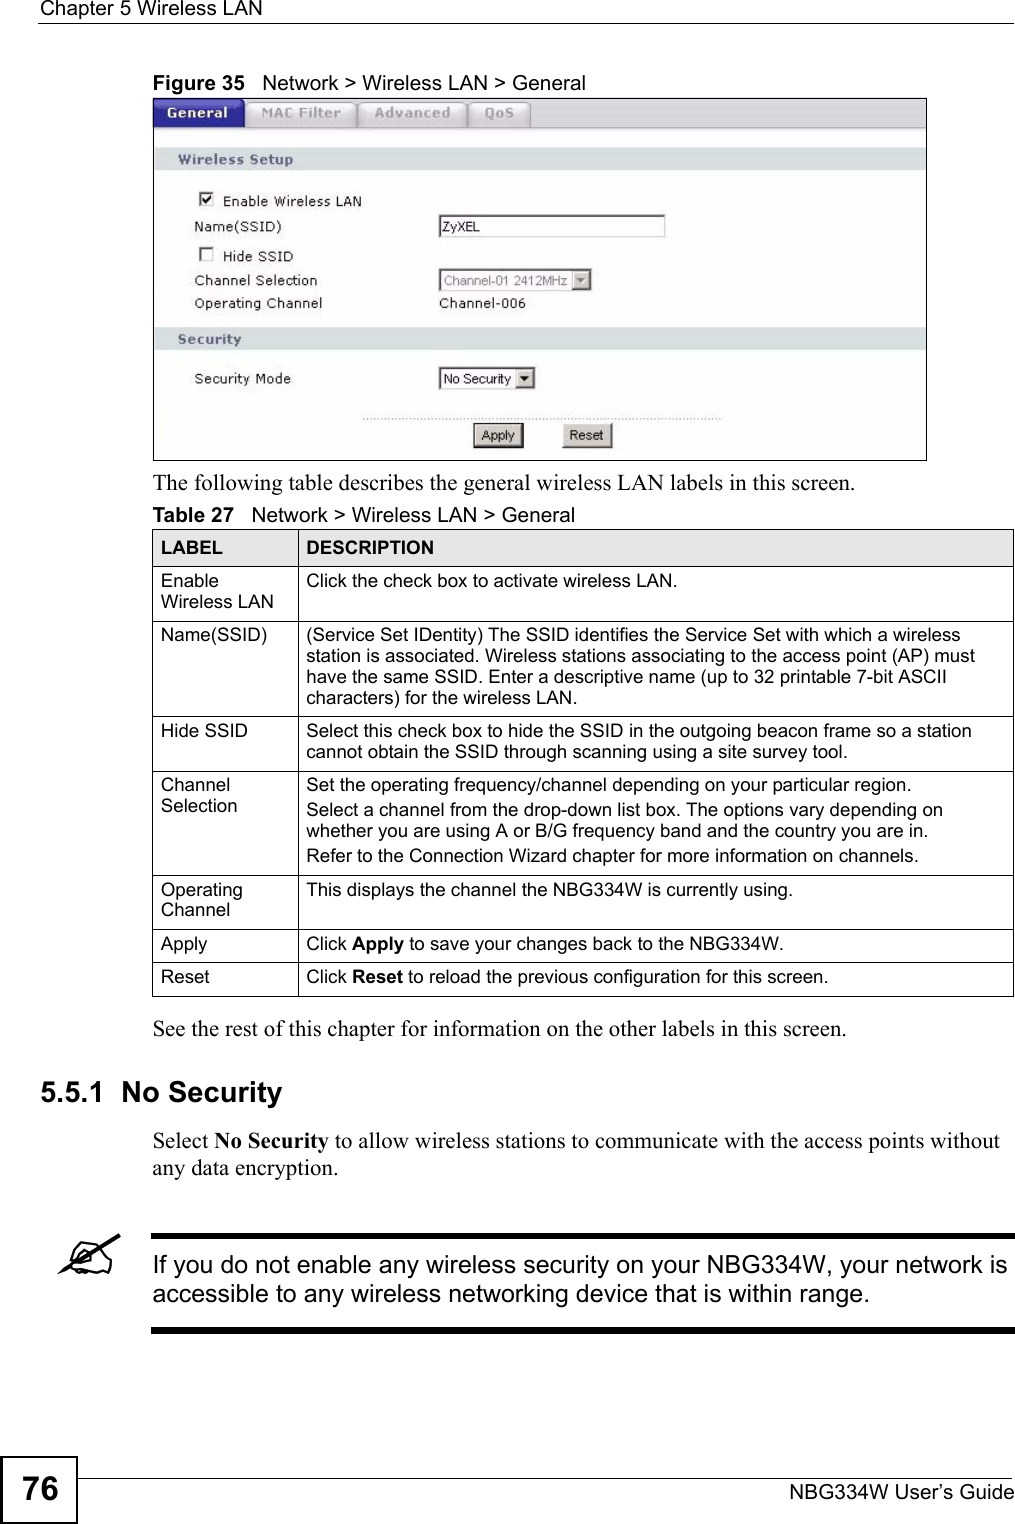 Chapter 5 Wireless LANNBG334W User’s Guide76Figure 35   Network &gt; Wireless LAN &gt; General The following table describes the general wireless LAN labels in this screen.See the rest of this chapter for information on the other labels in this screen. 5.5.1  No SecuritySelect No Security to allow wireless stations to communicate with the access points without any data encryption. &quot;If you do not enable any wireless security on your NBG334W, your network is accessible to any wireless networking device that is within range.Table 27   Network &gt; Wireless LAN &gt; GeneralLABEL DESCRIPTIONEnable Wireless LANClick the check box to activate wireless LAN.Name(SSID) (Service Set IDentity) The SSID identifies the Service Set with which a wireless station is associated. Wireless stations associating to the access point (AP) must have the same SSID. Enter a descriptive name (up to 32 printable 7-bit ASCII characters) for the wireless LAN. Hide SSID Select this check box to hide the SSID in the outgoing beacon frame so a station cannot obtain the SSID through scanning using a site survey tool.Channel SelectionSet the operating frequency/channel depending on your particular region. Select a channel from the drop-down list box. The options vary depending on whether you are using A or B/G frequency band and the country you are in. Refer to the Connection Wizard chapter for more information on channels.Operating Channel This displays the channel the NBG334W is currently using.Apply Click Apply to save your changes back to the NBG334W.Reset Click Reset to reload the previous configuration for this screen.